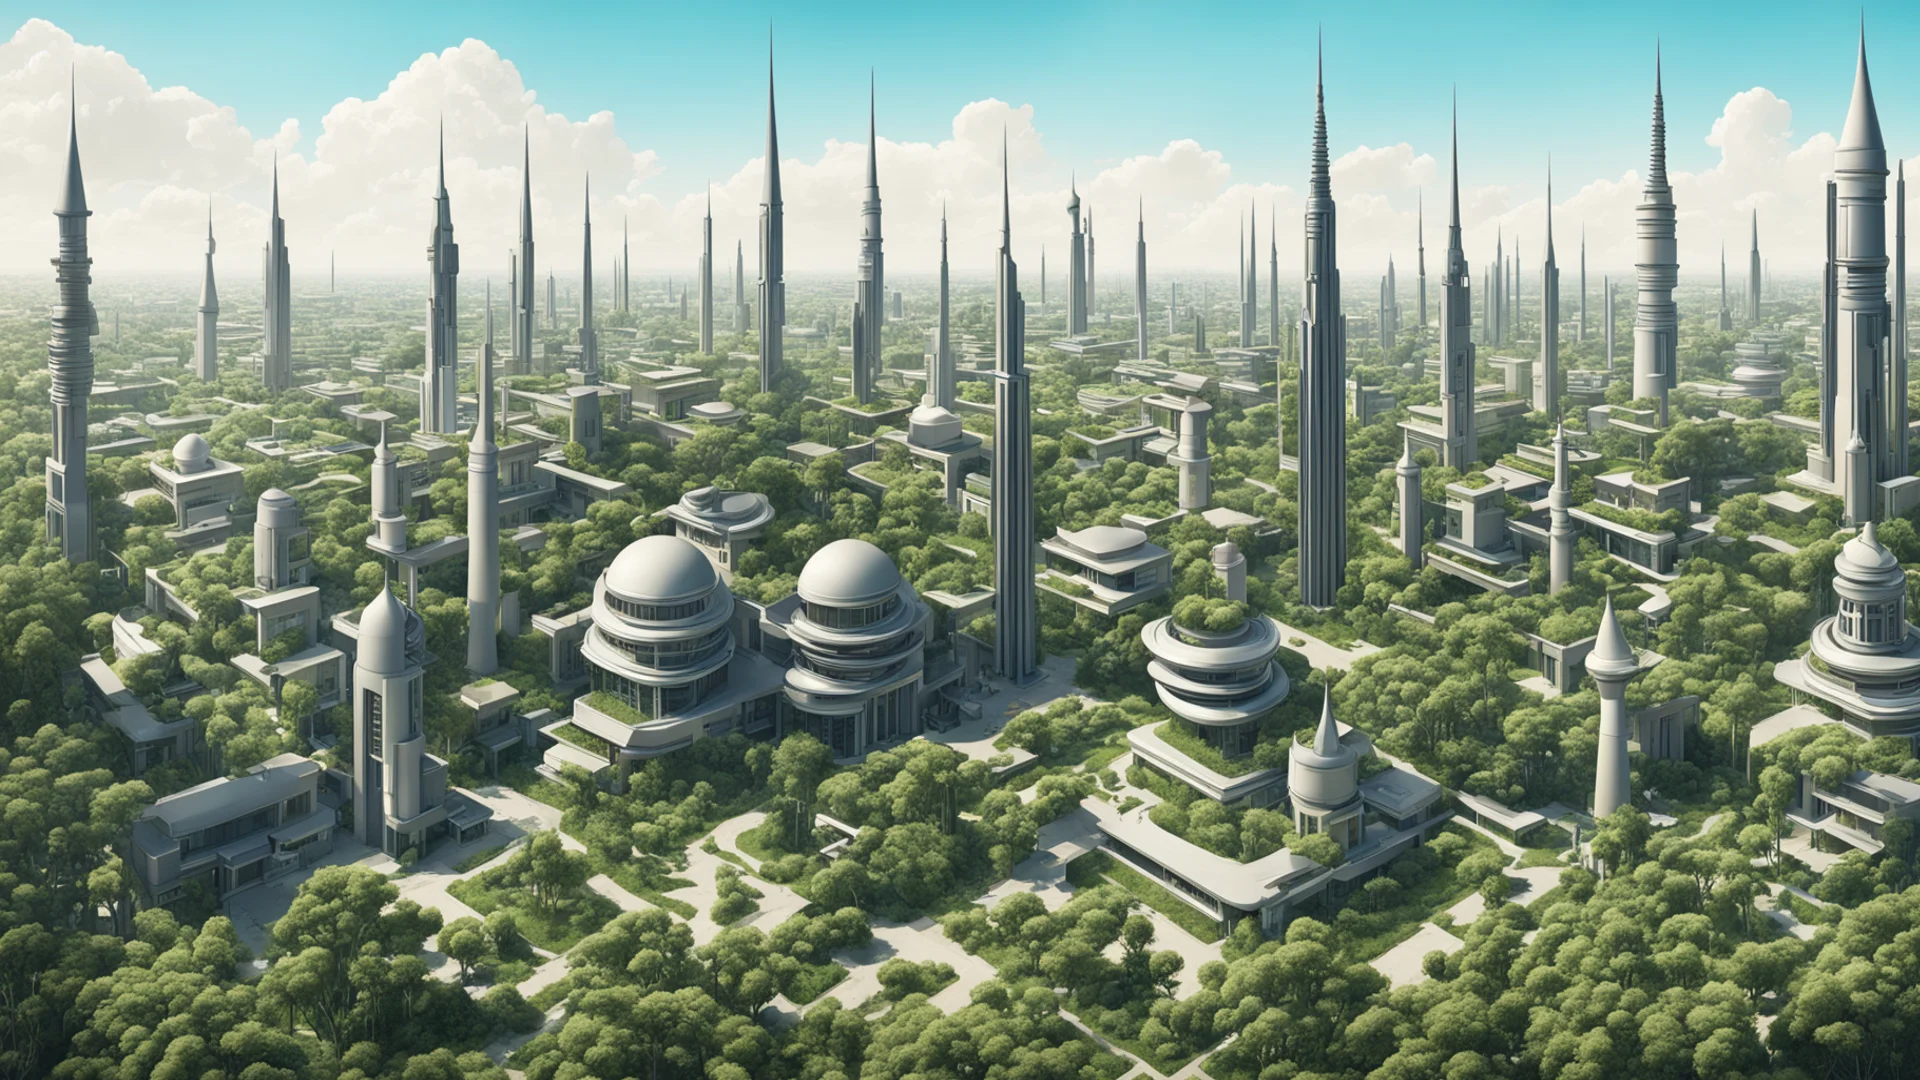 aihighly detailed futuristic suburban area with a minaret in between and vegetation in forms of buildings   amazing awesome portrait 2 wide